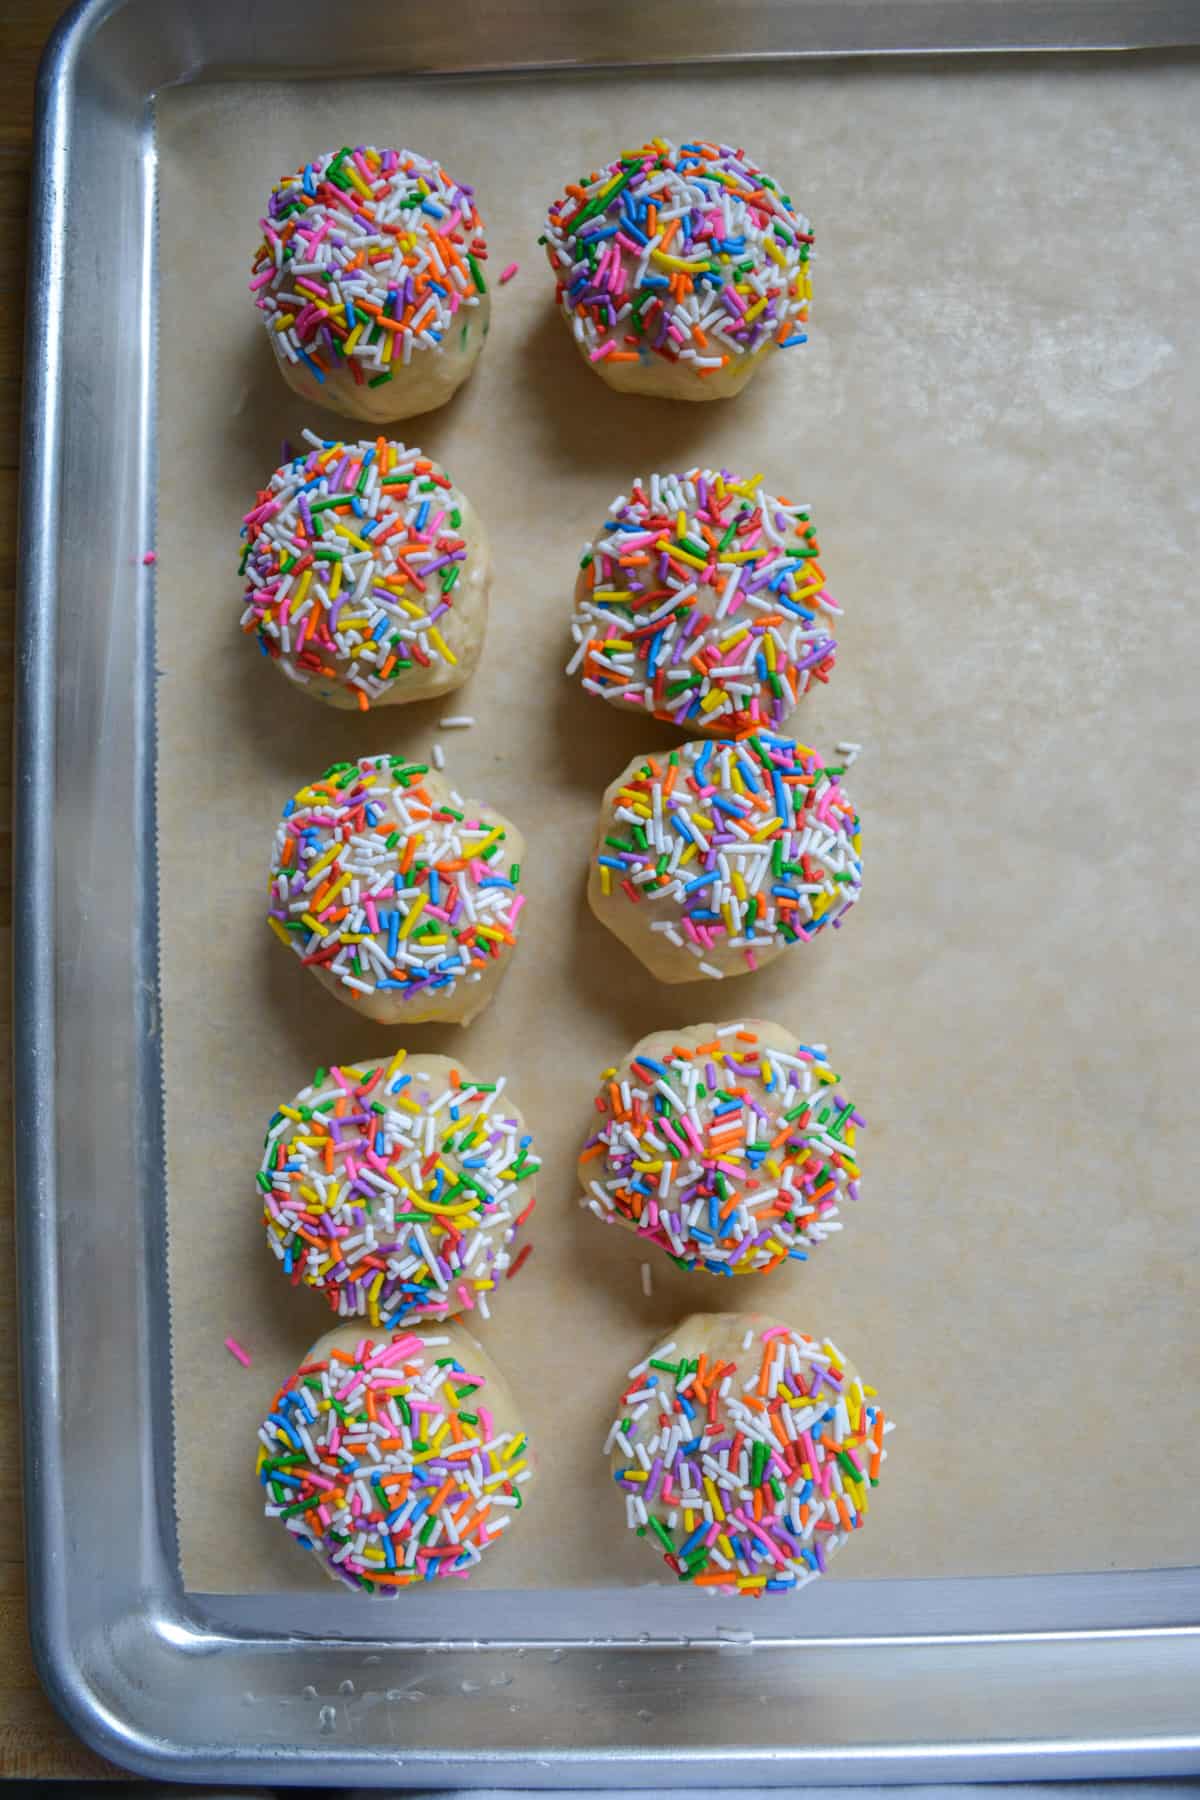 Scooped vegan cookie dough dipped into rainbow sprinkles on a baking sheet.